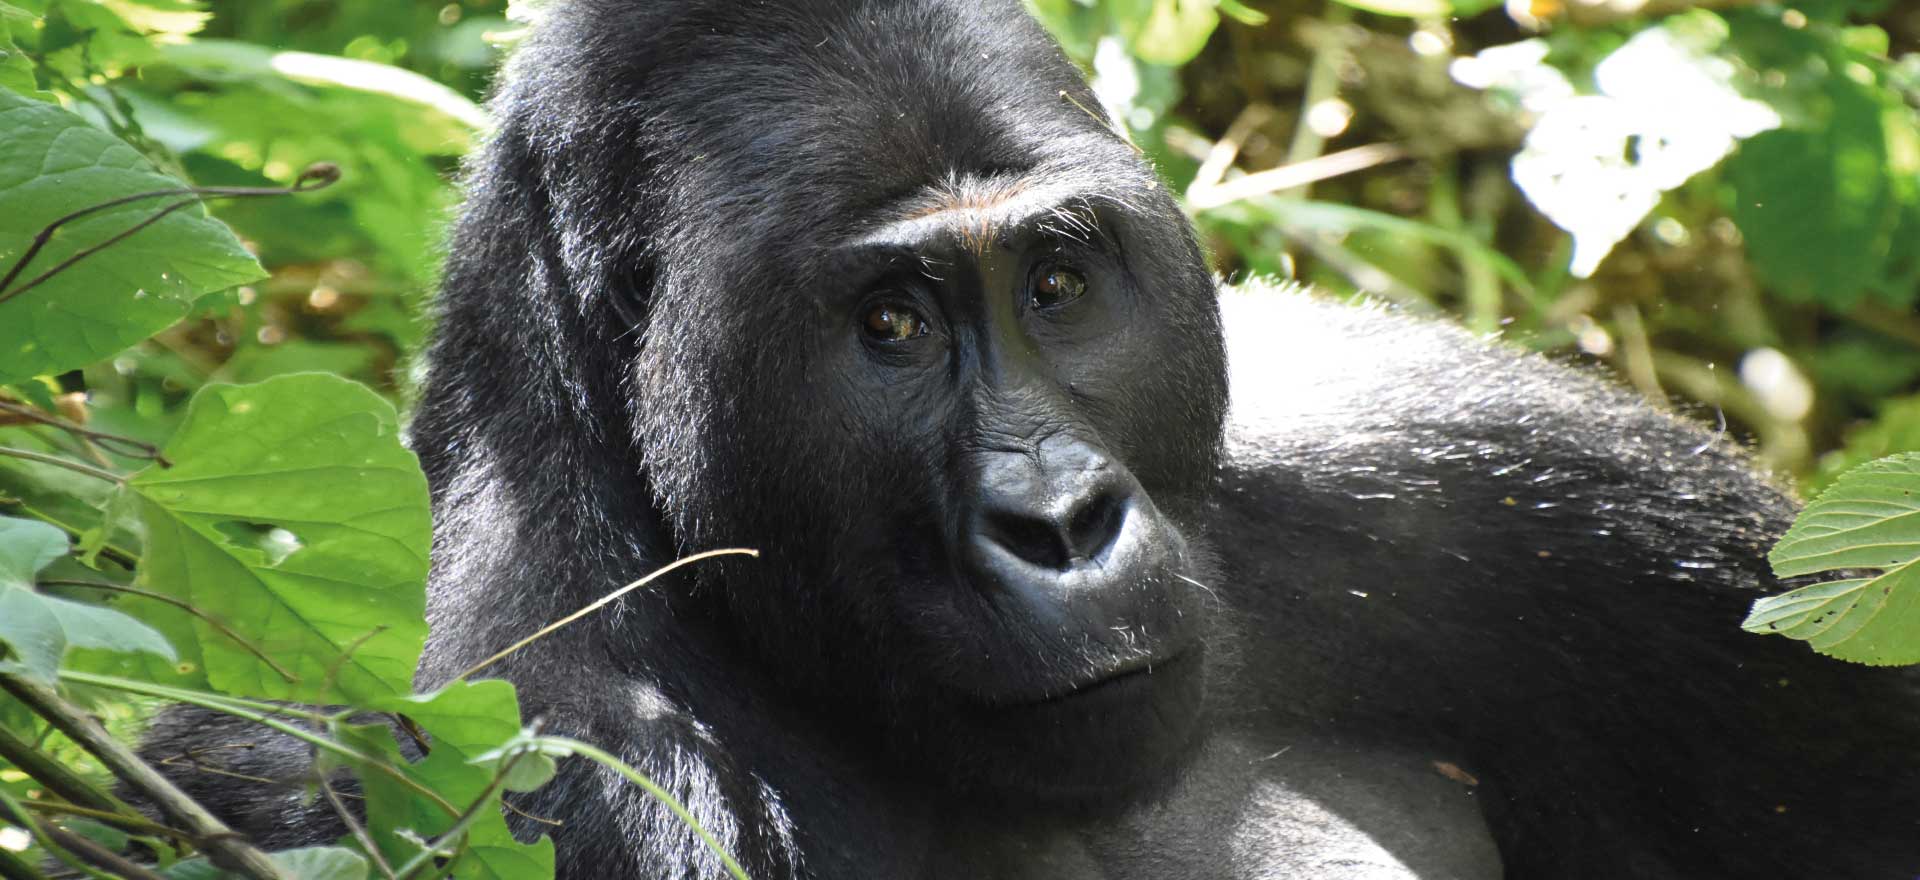 Western lowland gorilla in Loango National Park - Gabon tours and holidays